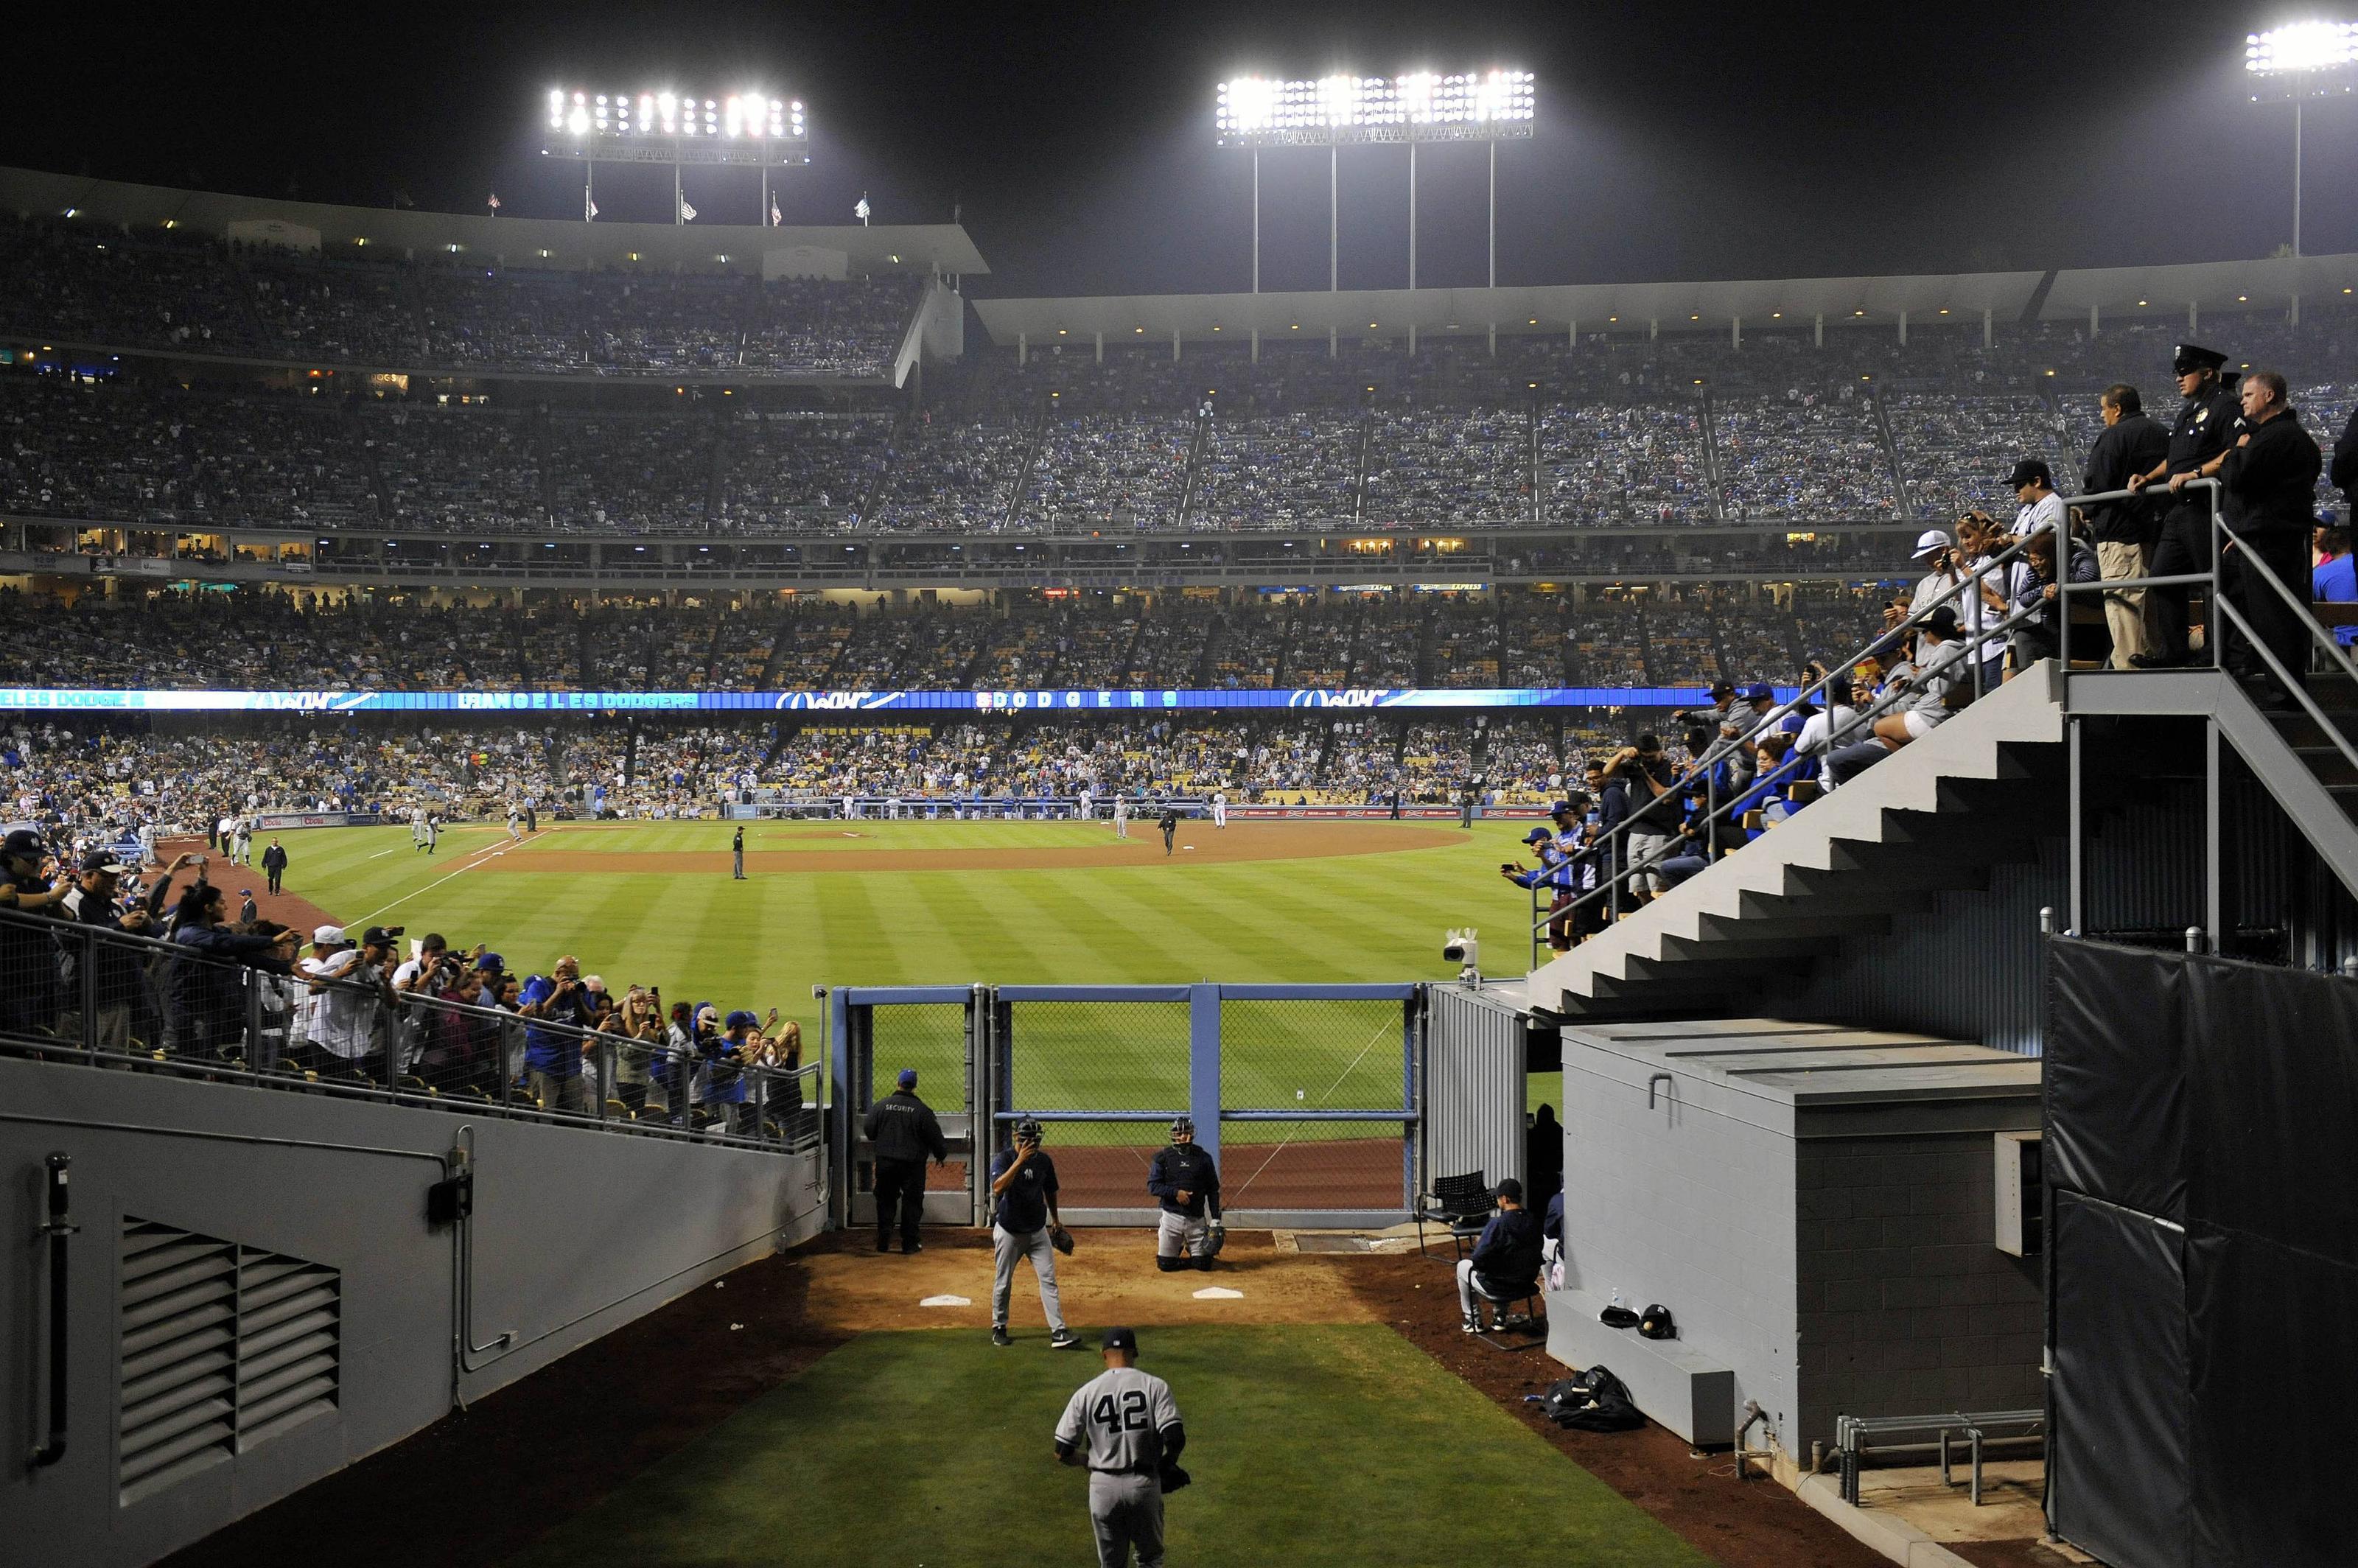 Mariano Rivera gets the call in Dodgers stadium